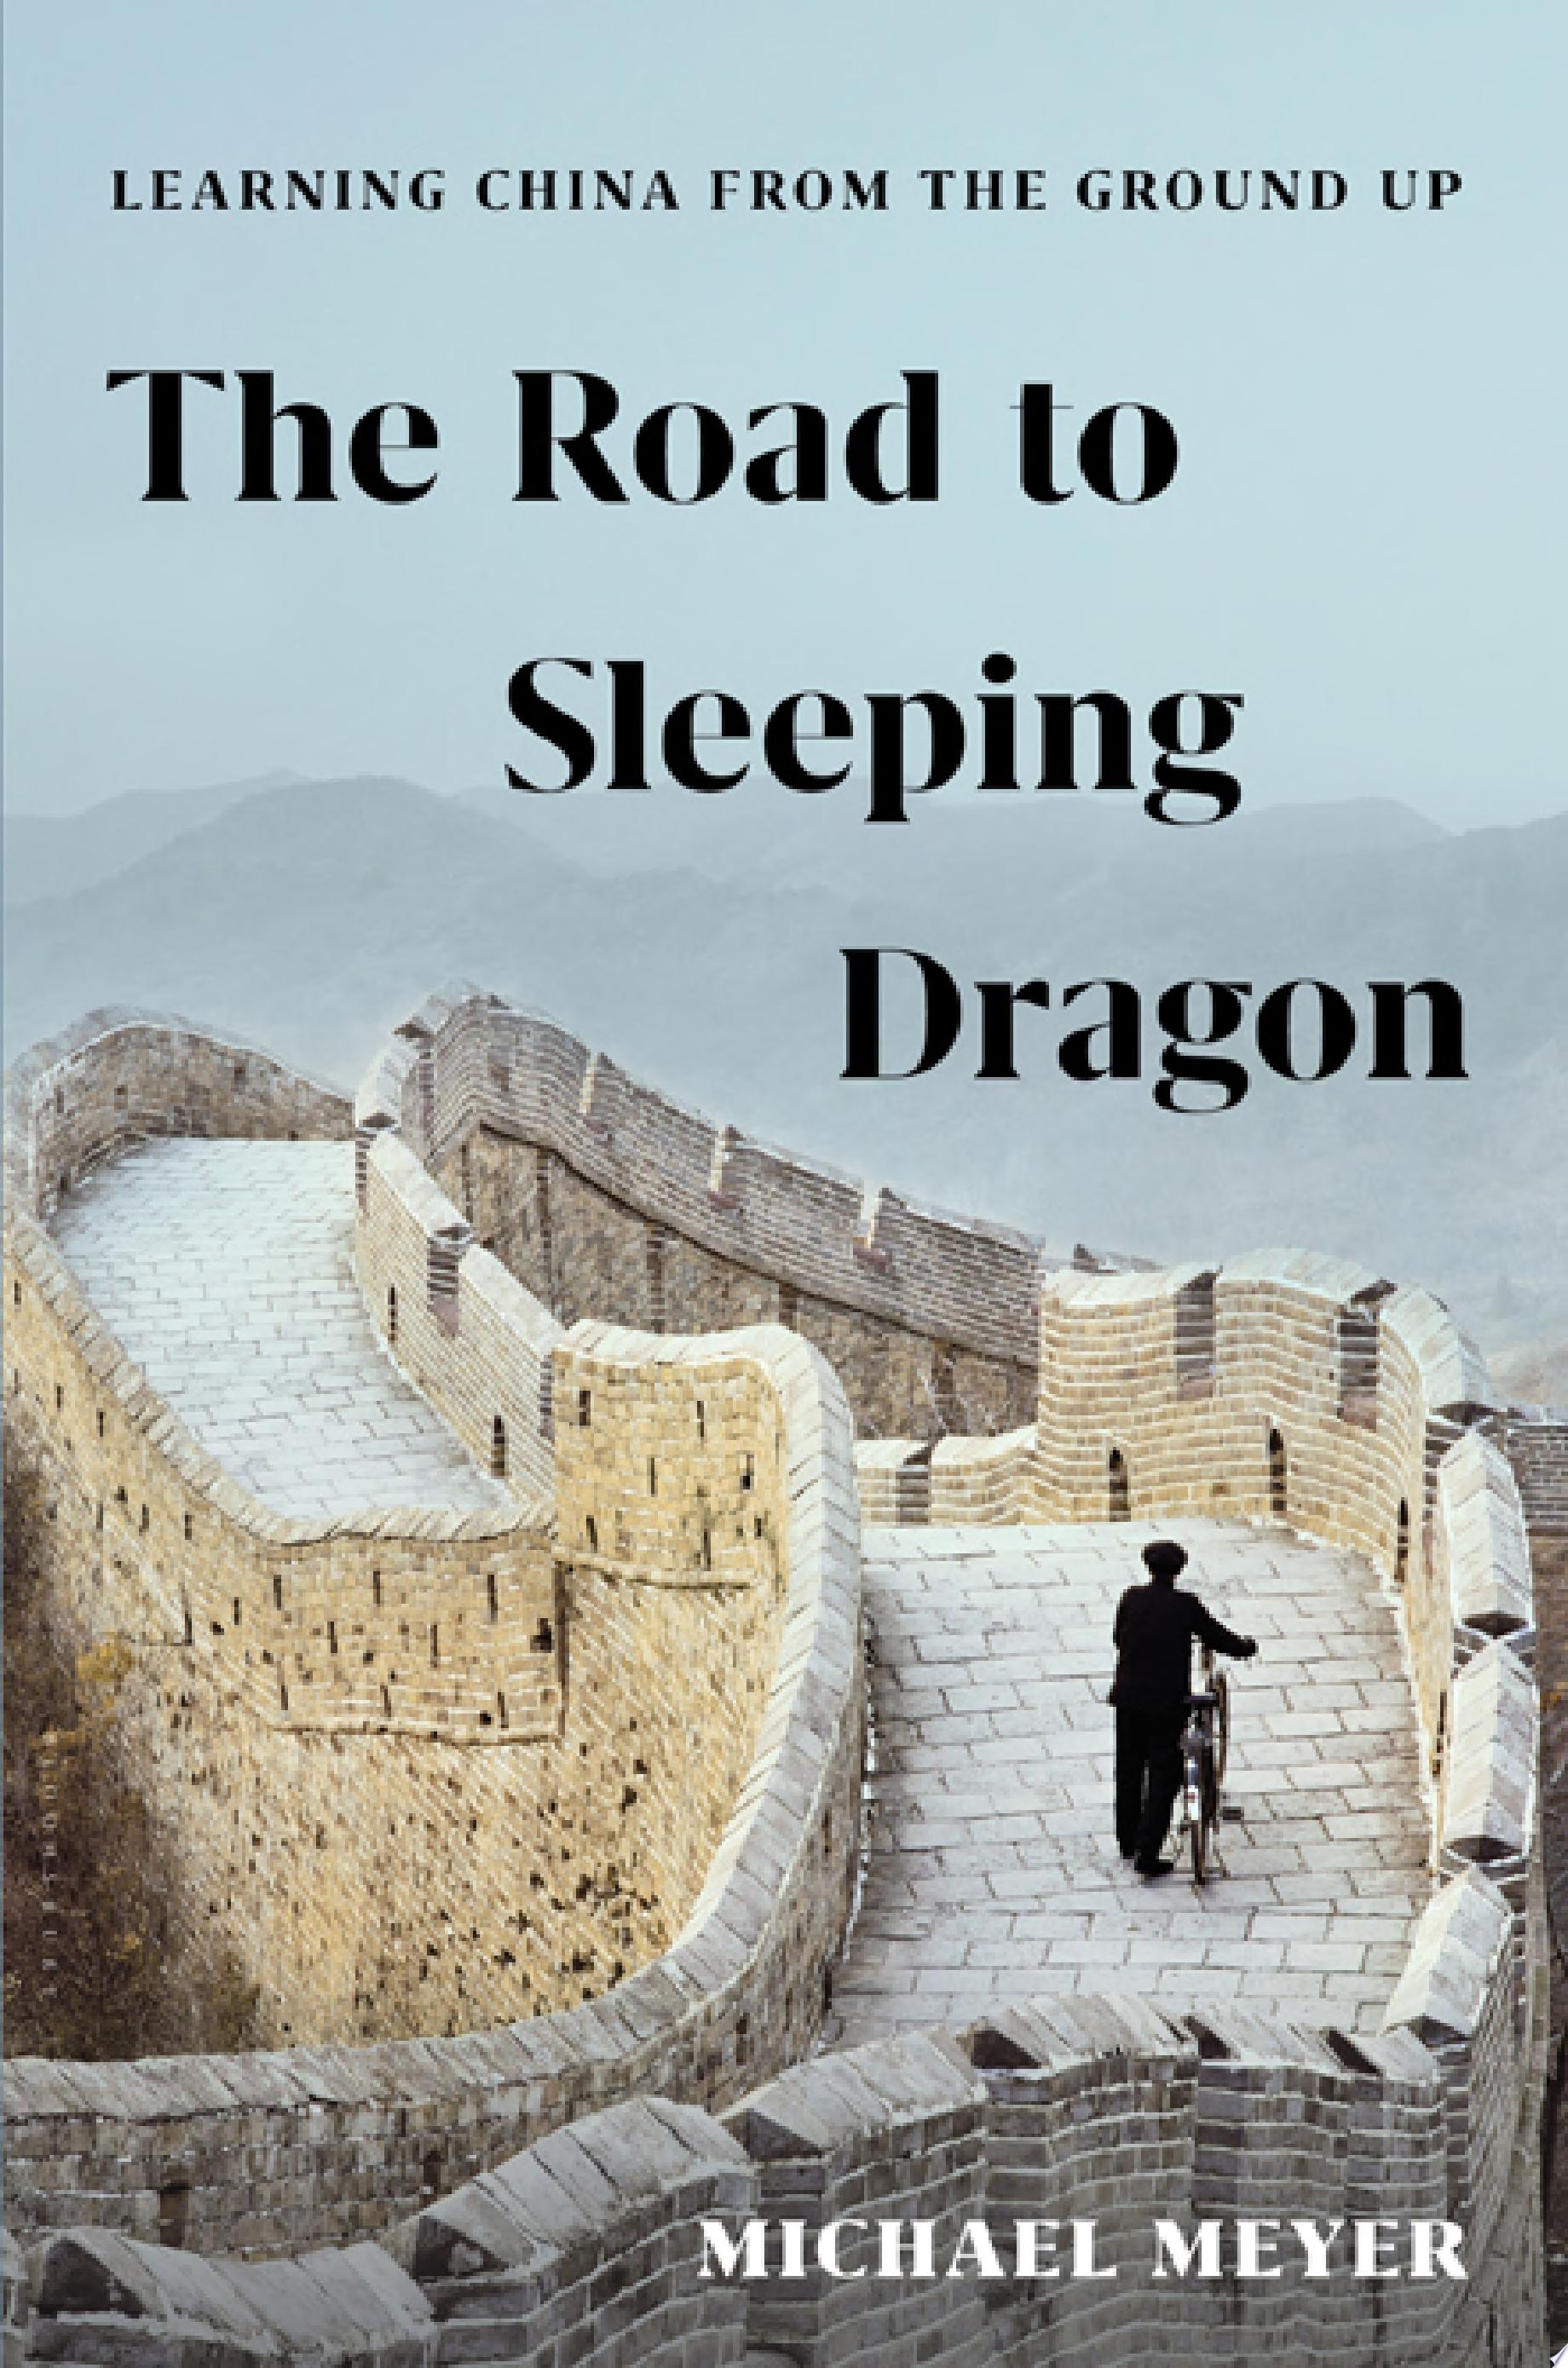 Image for "The Road to Sleeping Dragon"